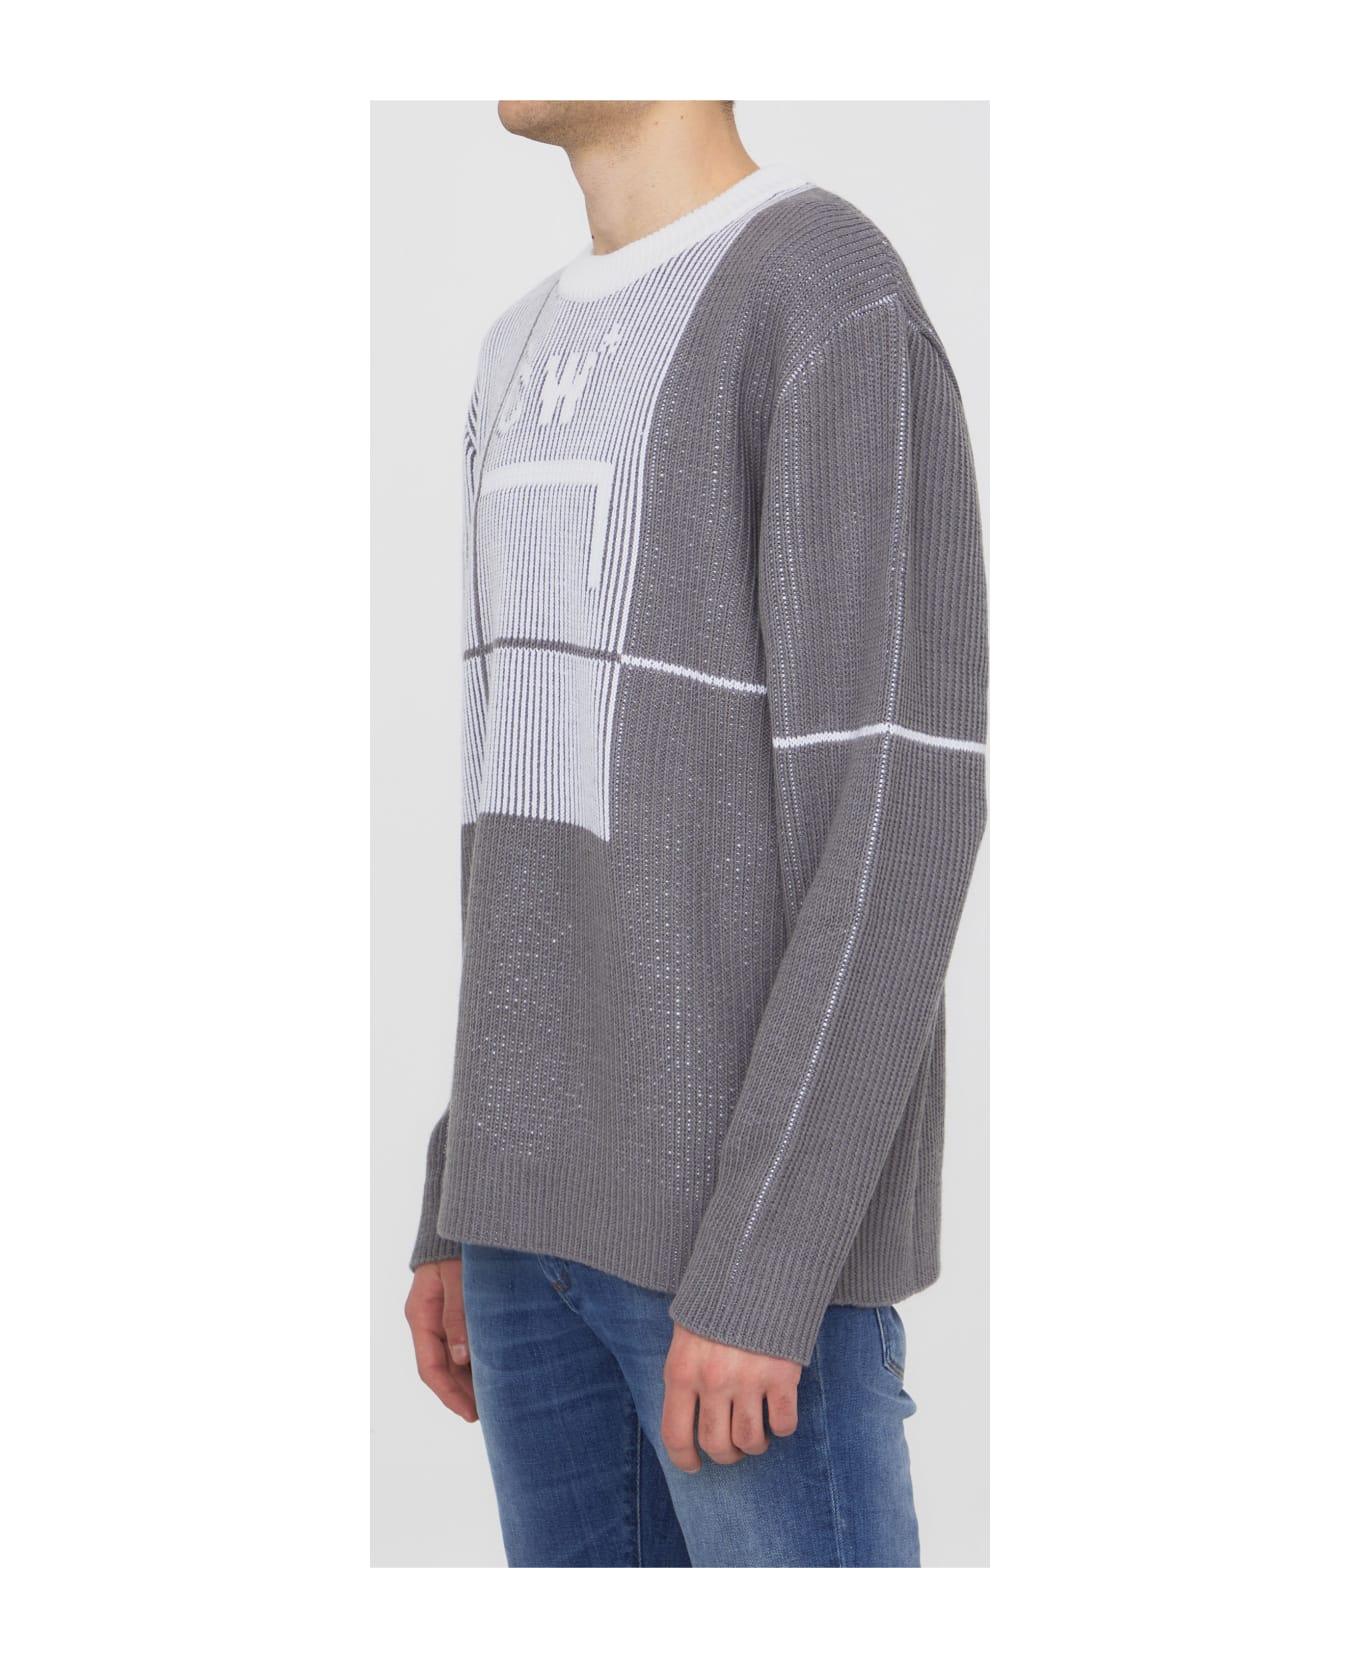 A-COLD-WALL Grid Sweater - GREY ニットウェア